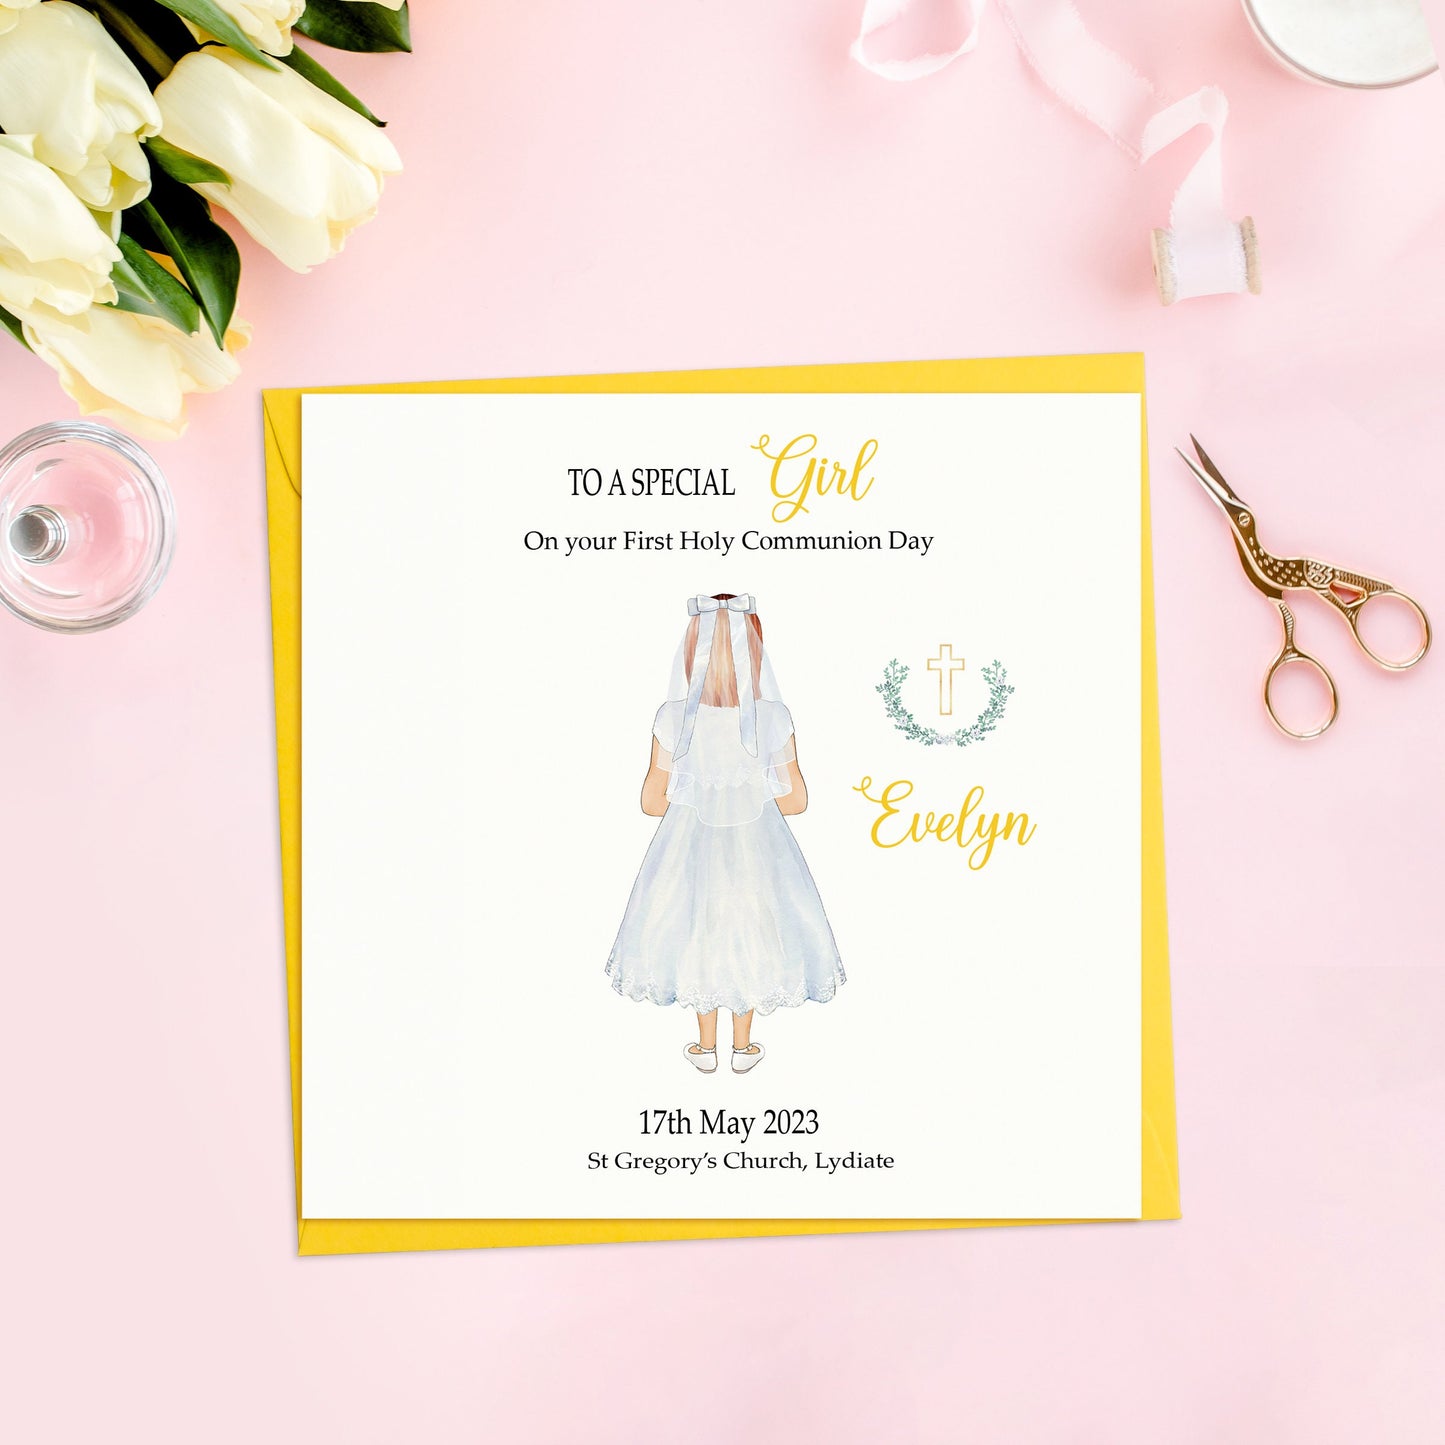 Special Girl First Holy Communion Card, Personalised 1st Holy Communion Card for Girl, Handmade Girl's Holy Communion Card